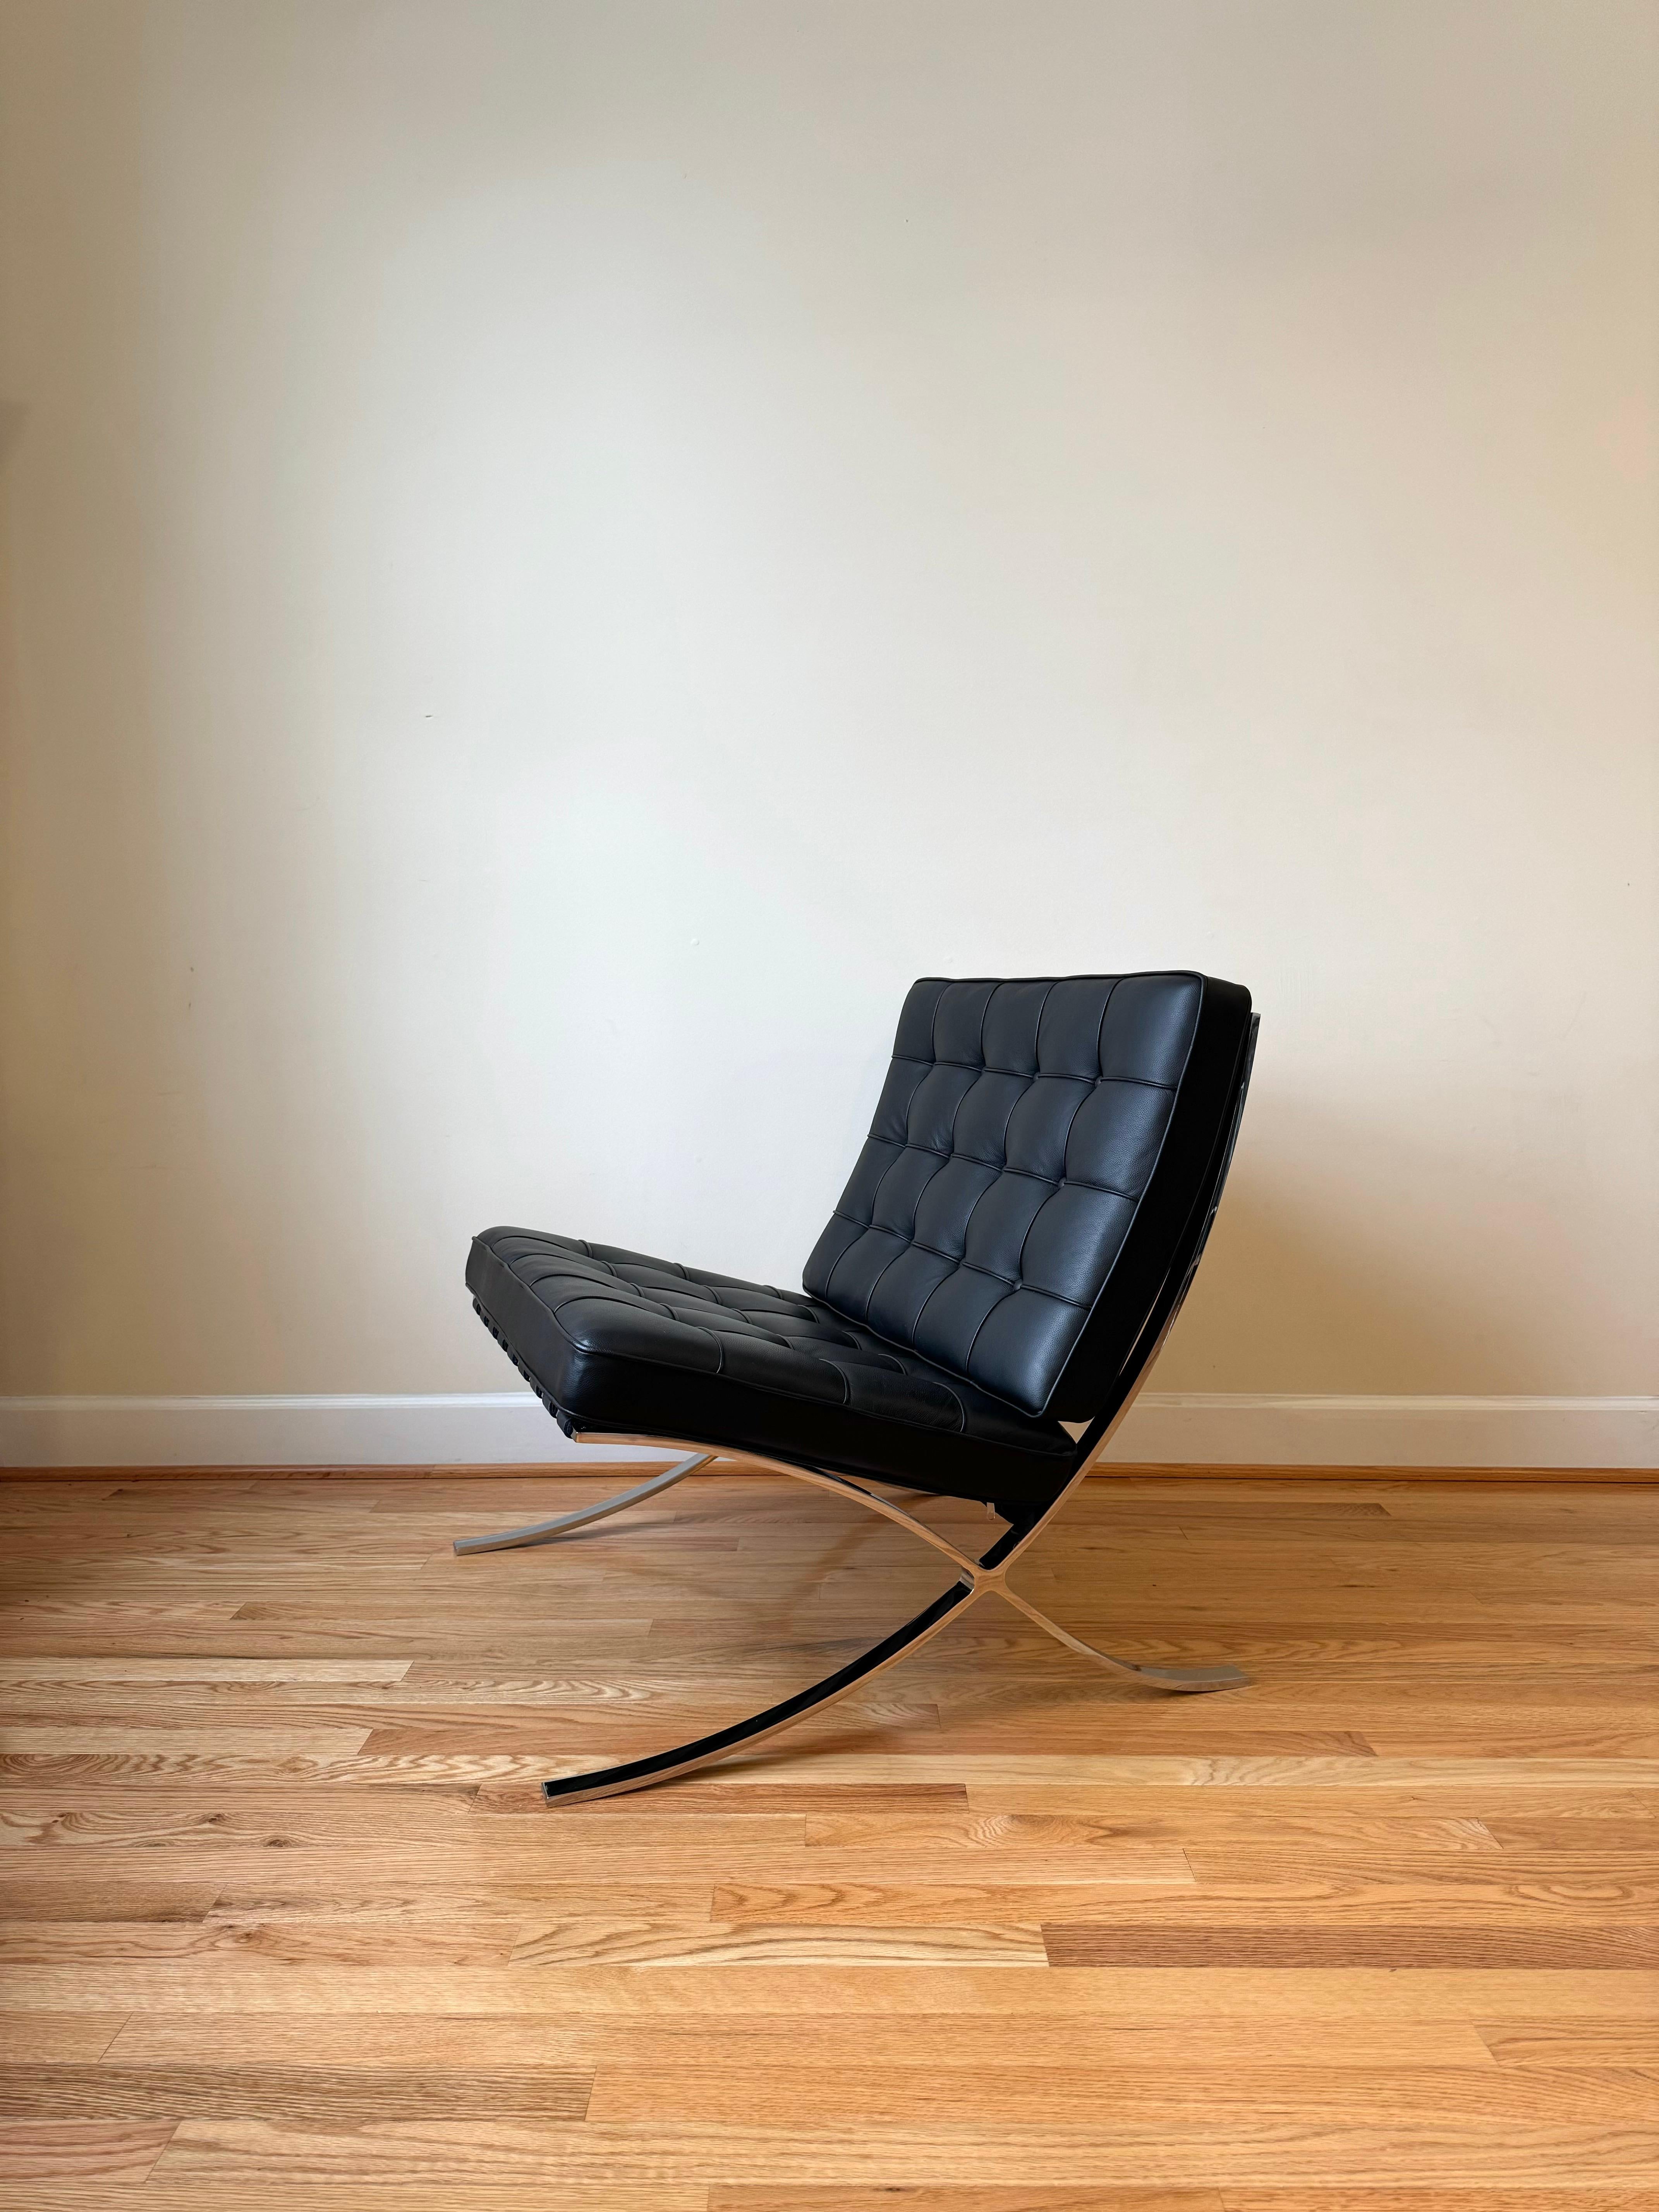 Bauhaus Barcelona Chair by Ludwig Mies van der Rohe for Knoll (Like NEW condition)  For Sale